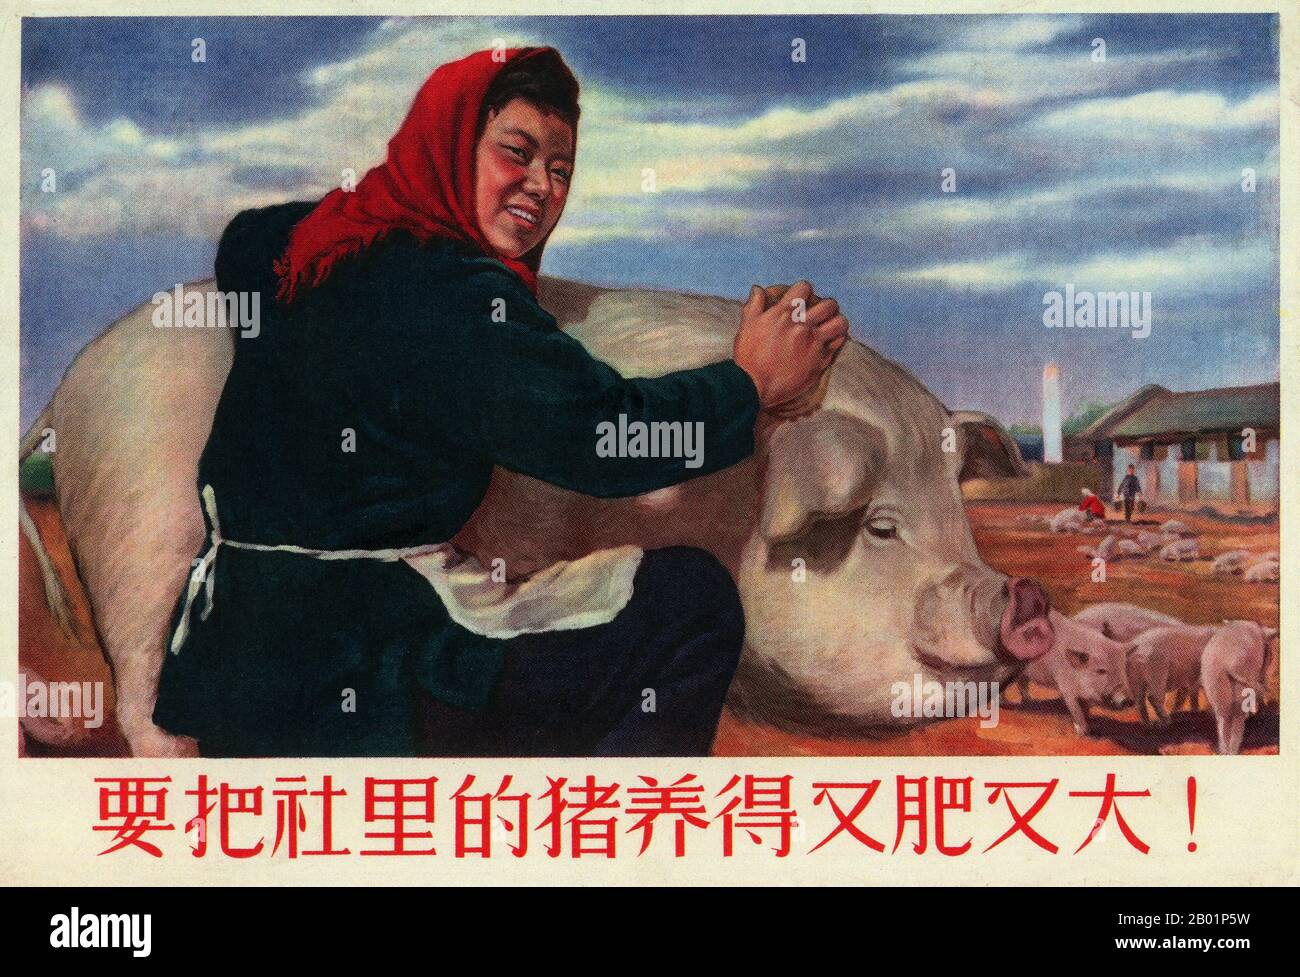 China: 'The Hogs of the Commune Must be Raised to be Fat and Big!' Propaganda poster from around the time of the Great Leap Forward (1958-1961) by Weng Yizhi, 1956.  The Great Leap Forward of the People's Republic of China (PRC) was an economic and social campaign of the Communist Party of China (CPC), reflected in planning decisions from 1958 to 1961, which aimed to use China's vast population to rapidly transform the country from an agrarian economy into a modern communist society through the process of rapid industrialisation, and collectivisation. Stock Photo